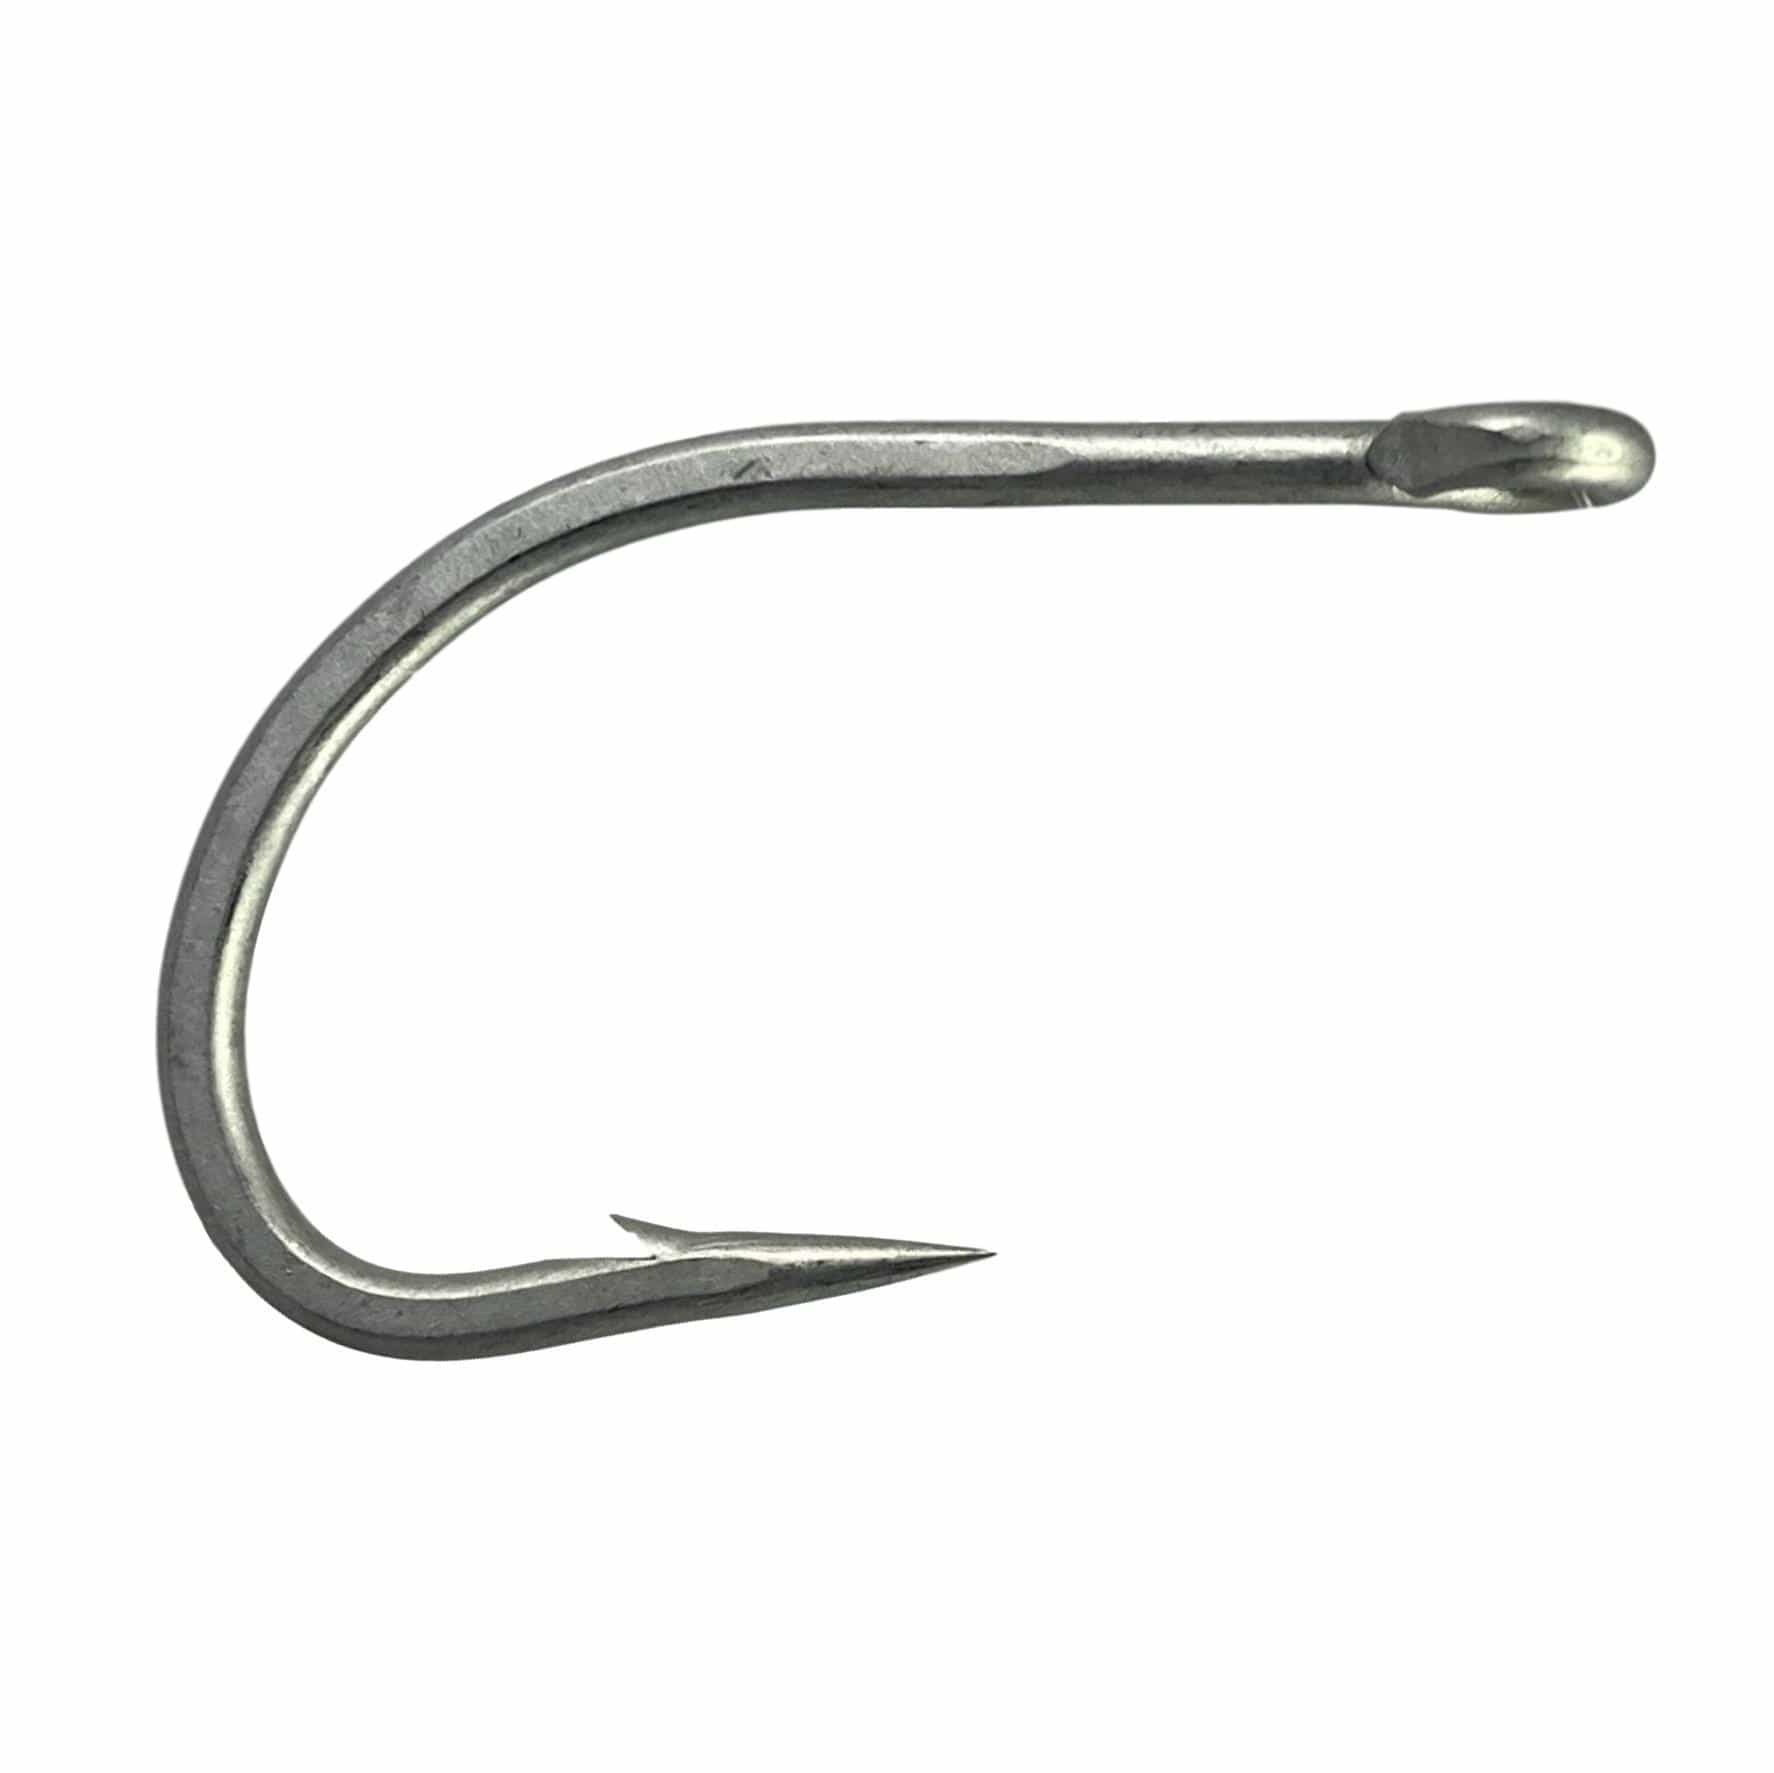 VMC 7265PS O'Shaughnessy Live Bait Hook (10 Per Pack) - The